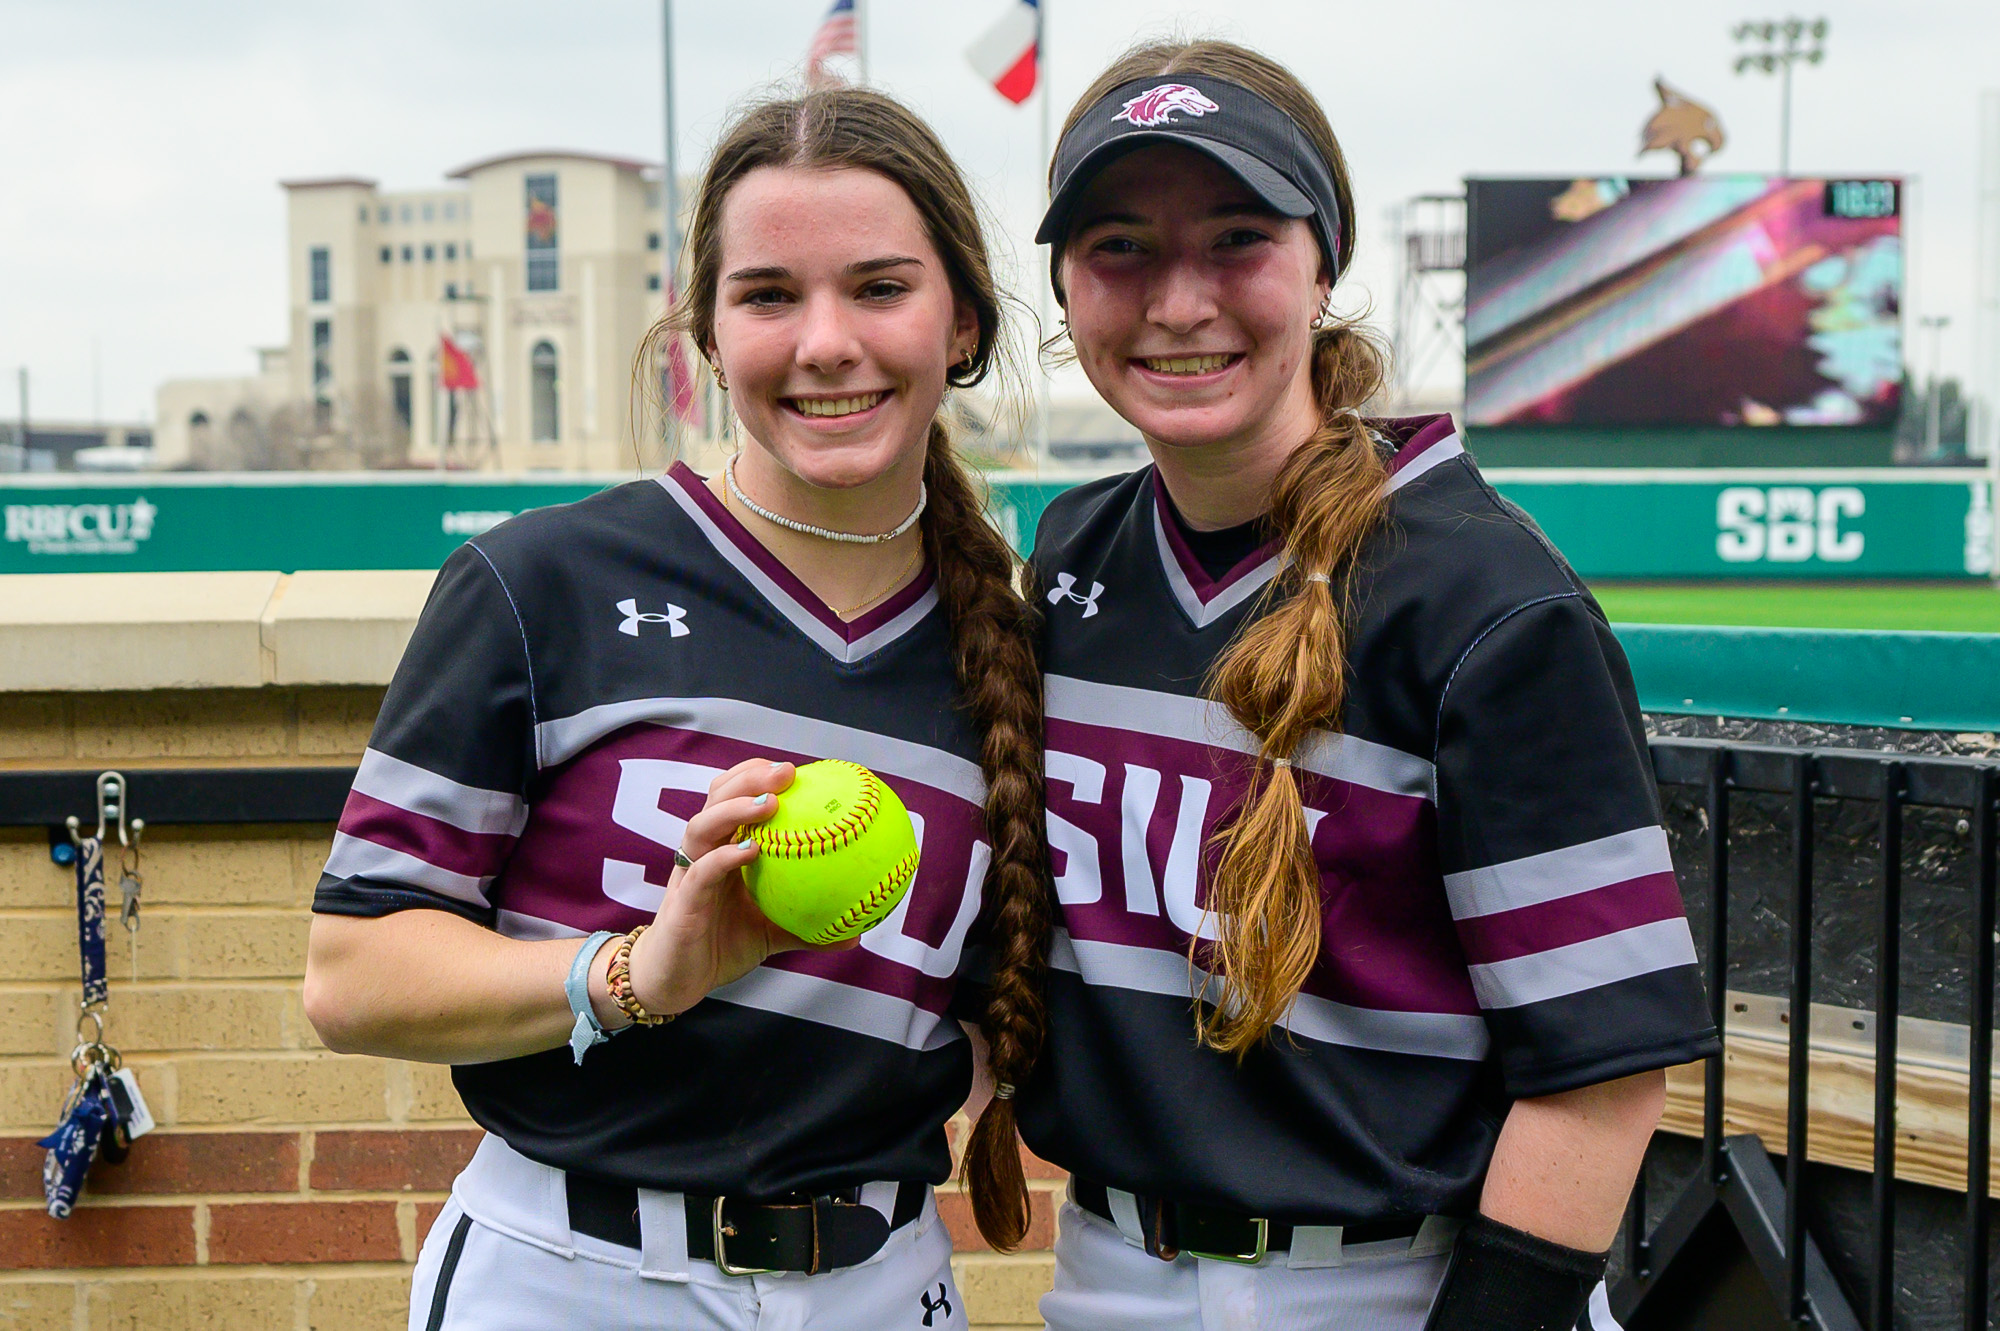 Pitcher Maddia Groff (left) and catcher Rylinn Groff (right) pose with the game ball from Maddias perfect game in their collegiate debut Feb. 9, 2024 at Bobcat Stadium in San Marcos, Texas. Photo provided by Saluki Athletics.